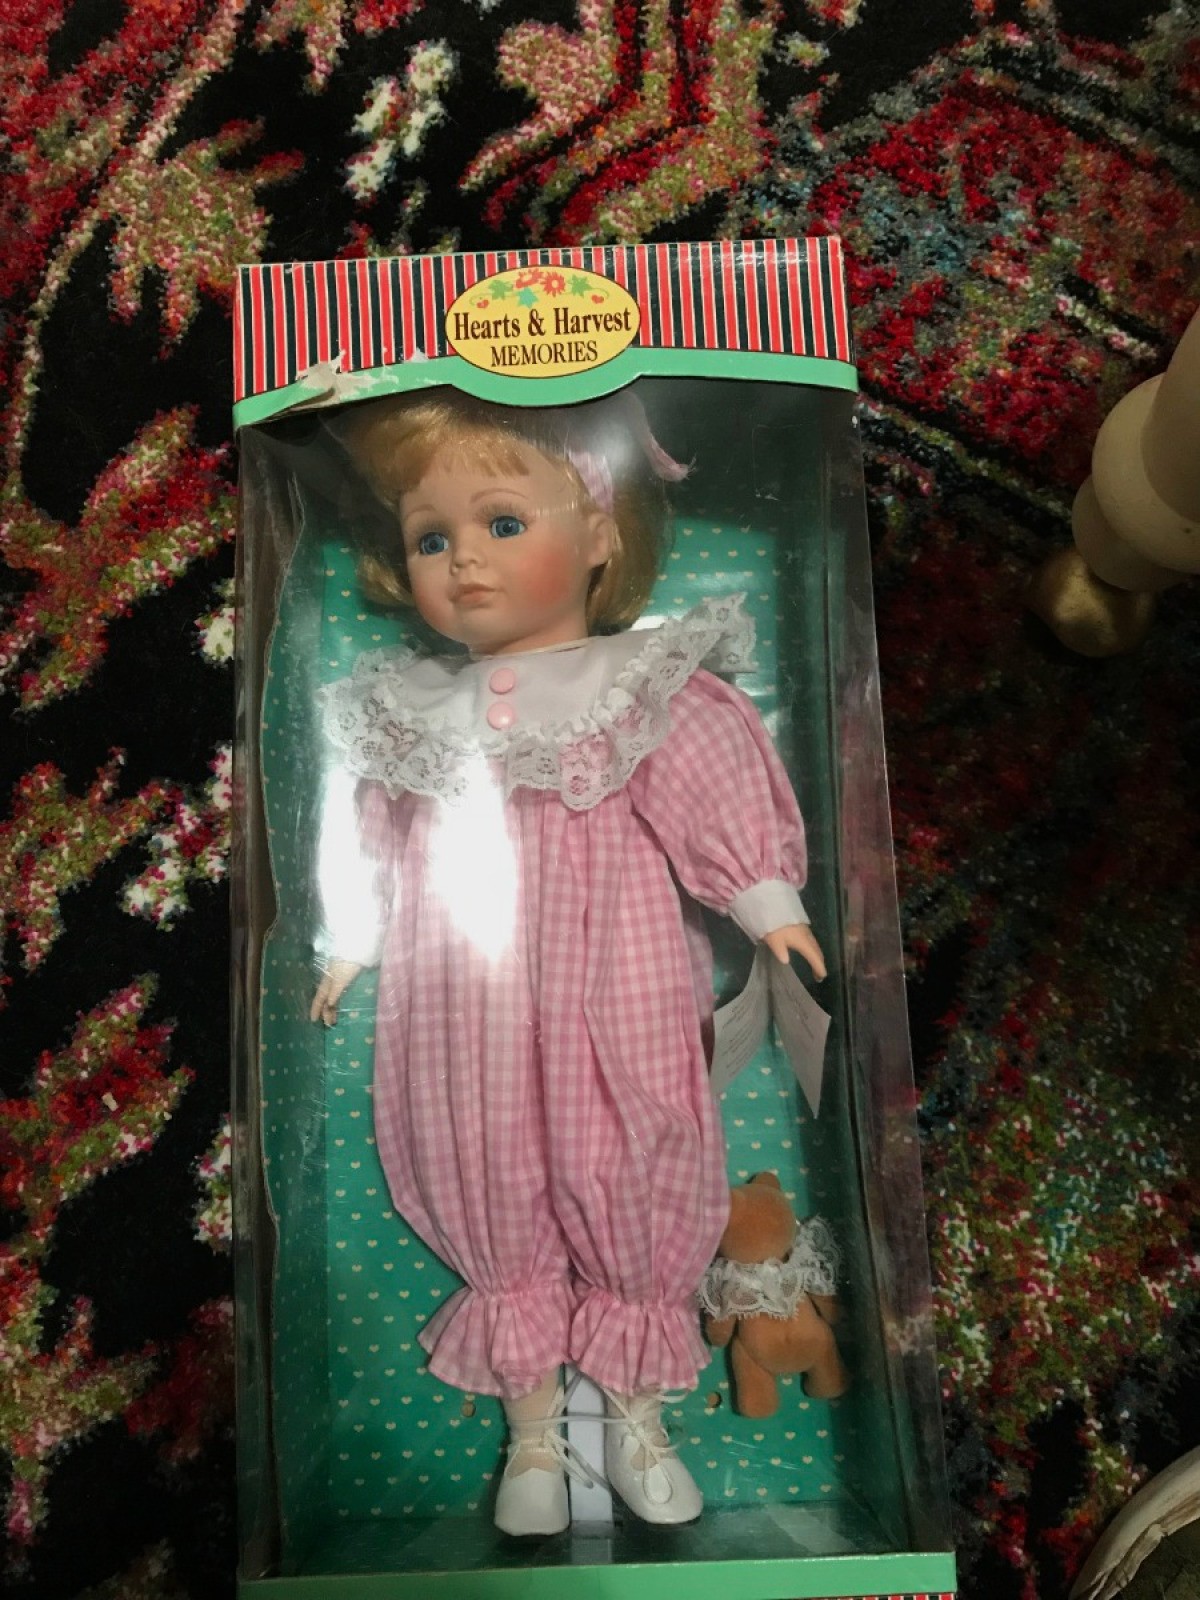 hearts and harvest memories dolls